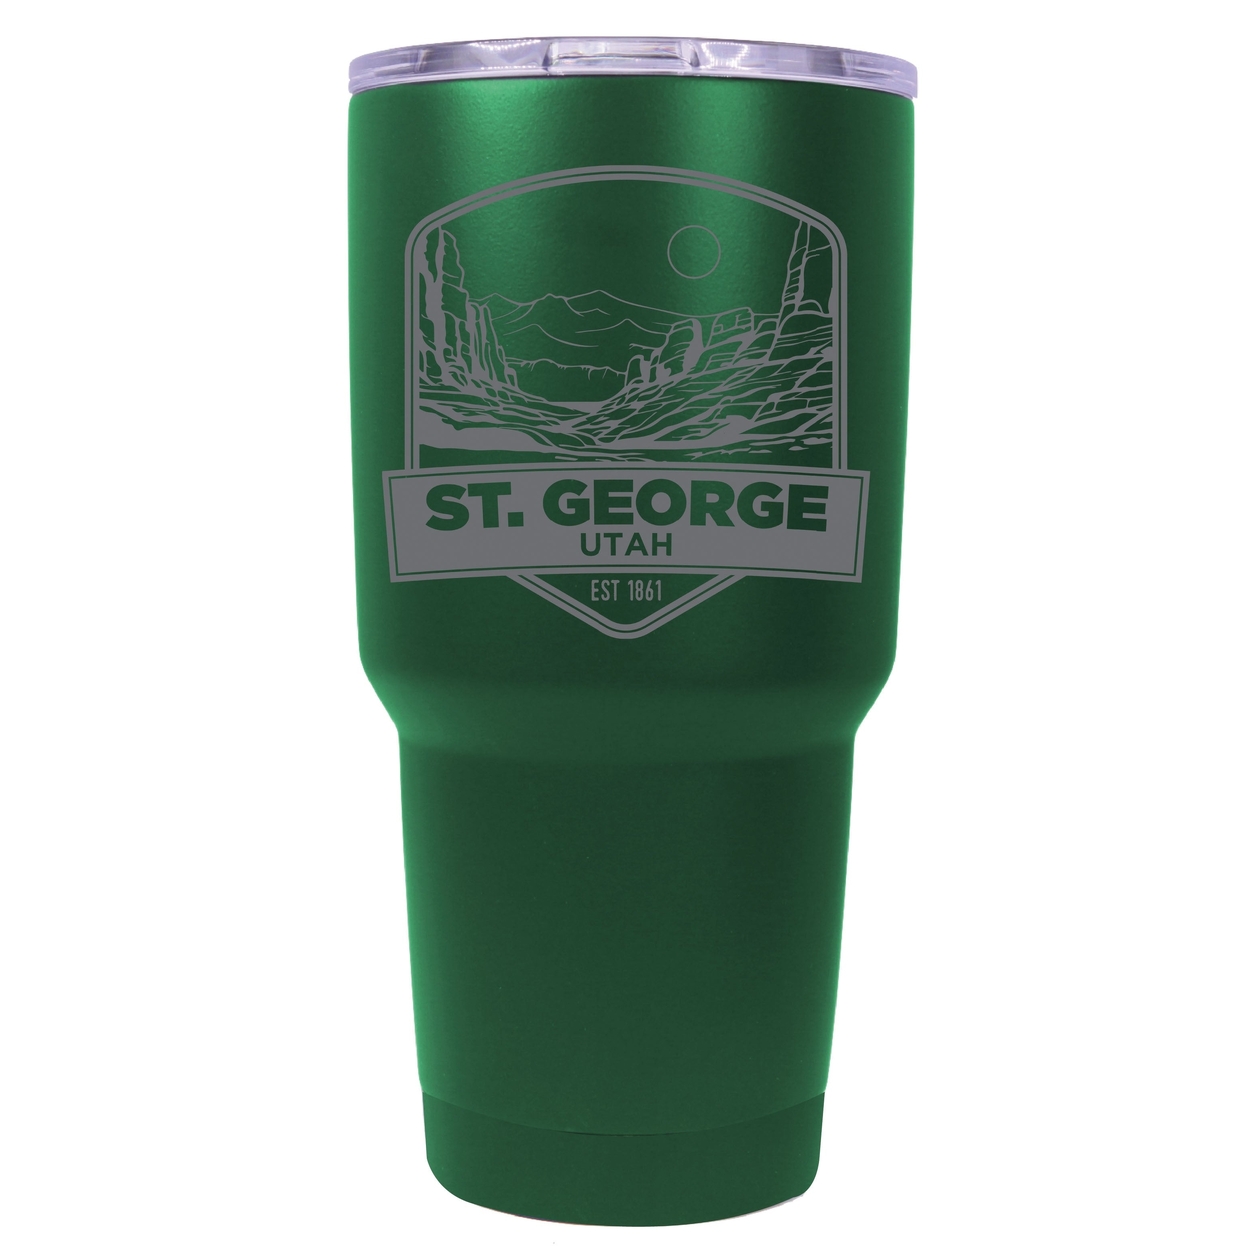 St. George Utah Souvenir 24 Oz Engraved Insulated Stainless Steel Tumbler - Green,,4-Pack